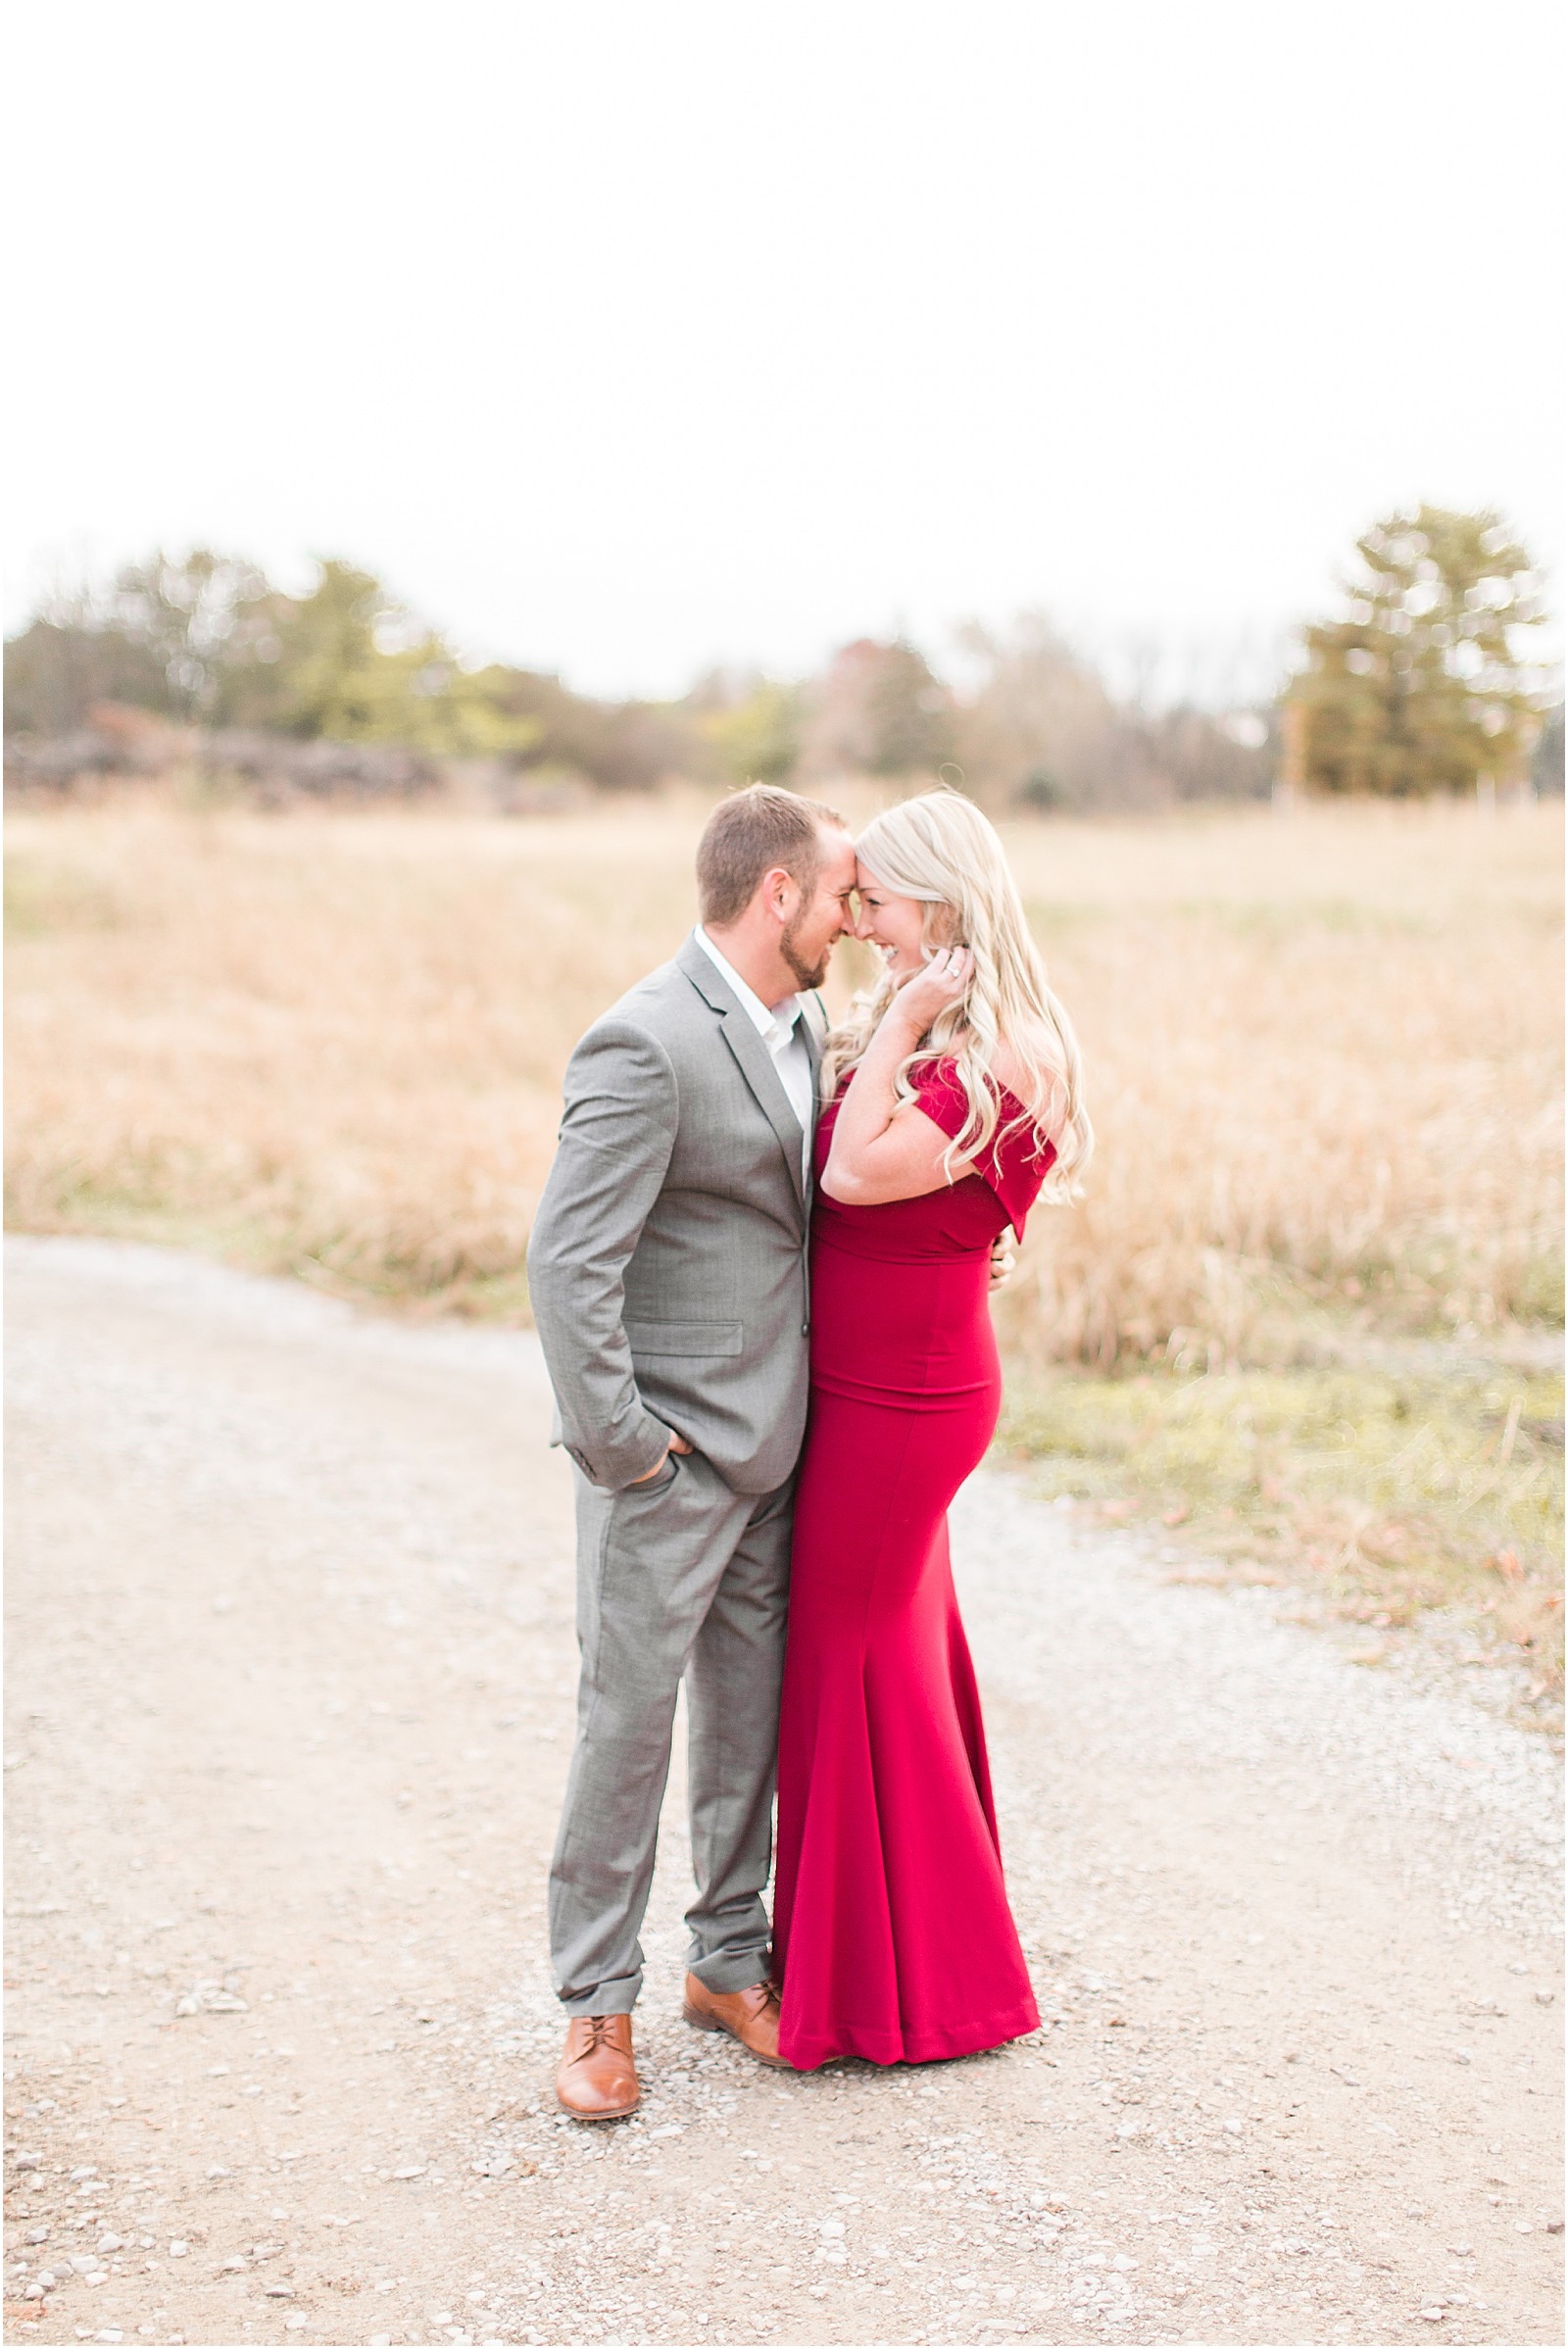 A Perfect Fall Engagement Session at Evansville State Park | Jamie and Max | Bret and Brandie Photography 032.jpg